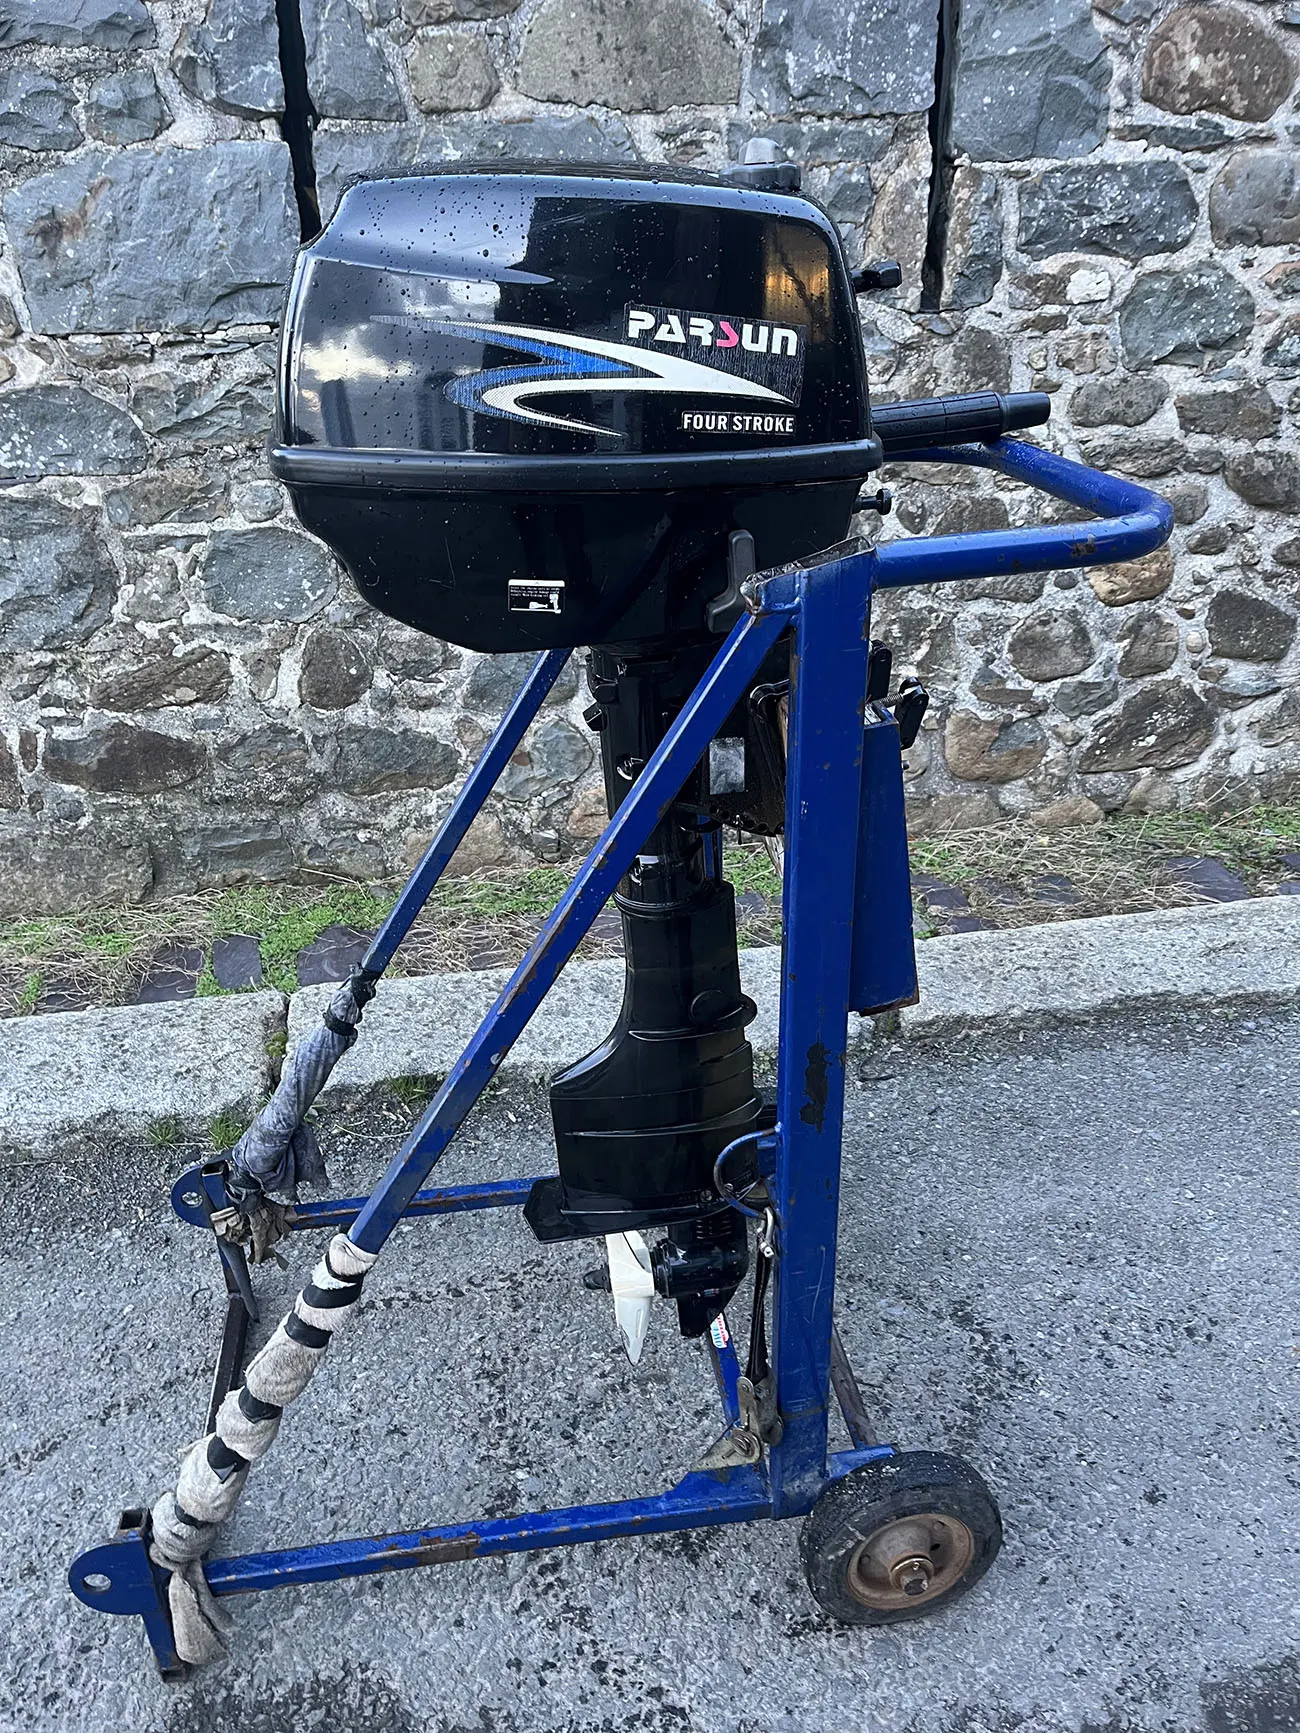 Used 4hp parsun outboard